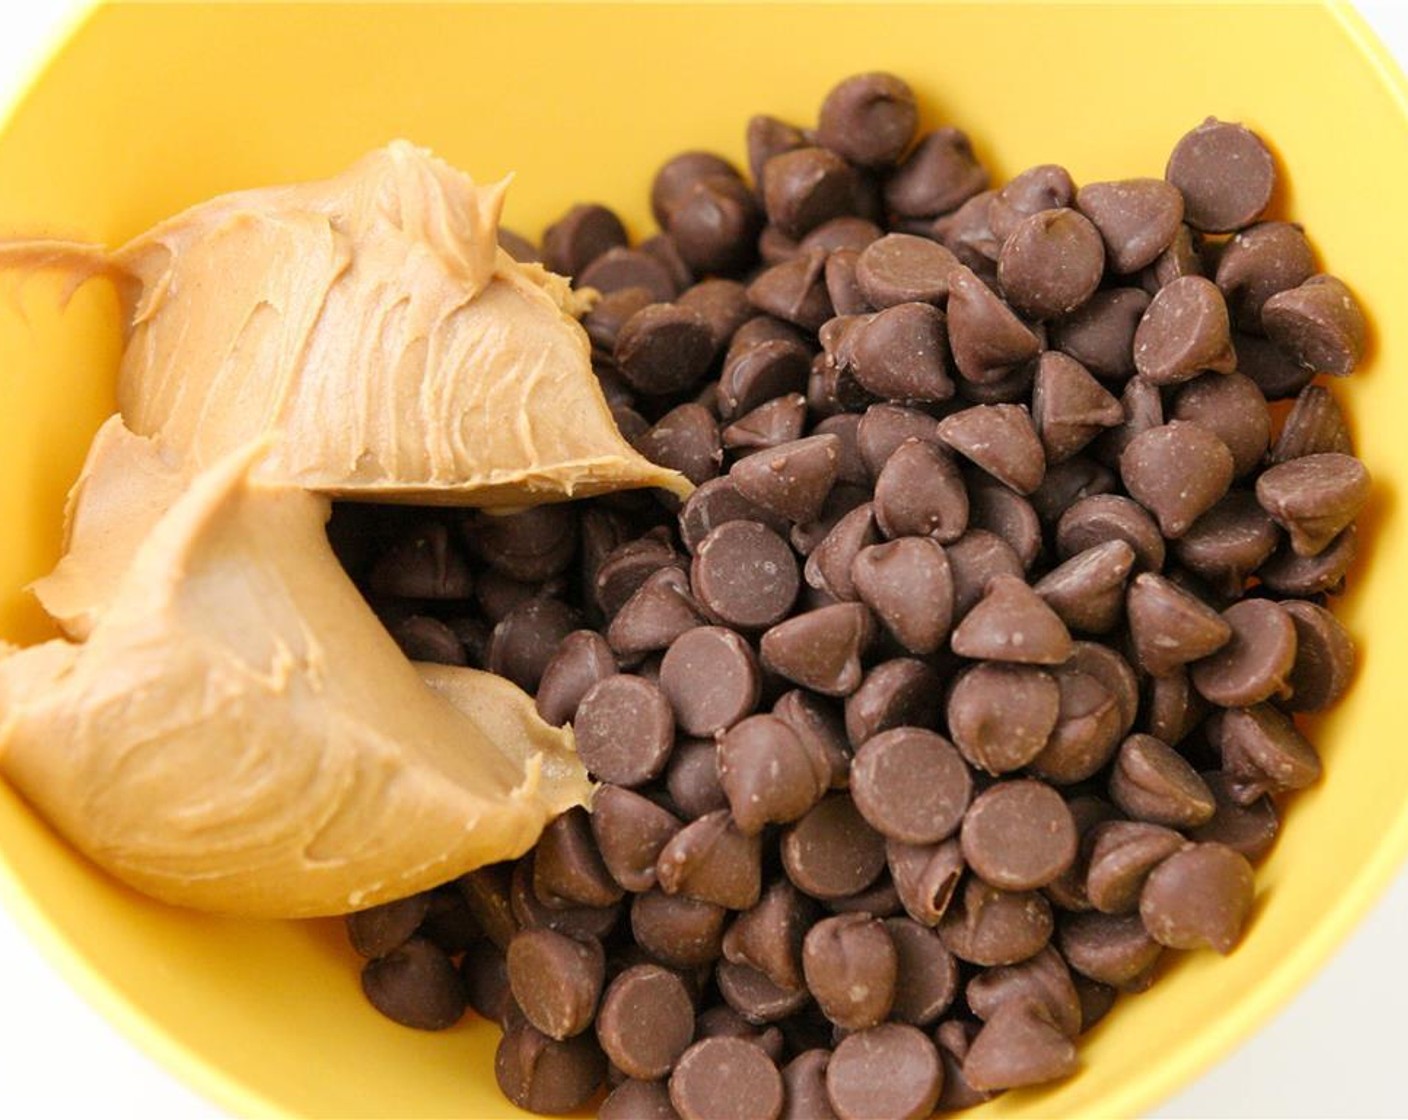 step 2 In a small bowl, combine Milk Chocolate Chips (1 cup) and Creamy Peanut Butter (1/4 cup).